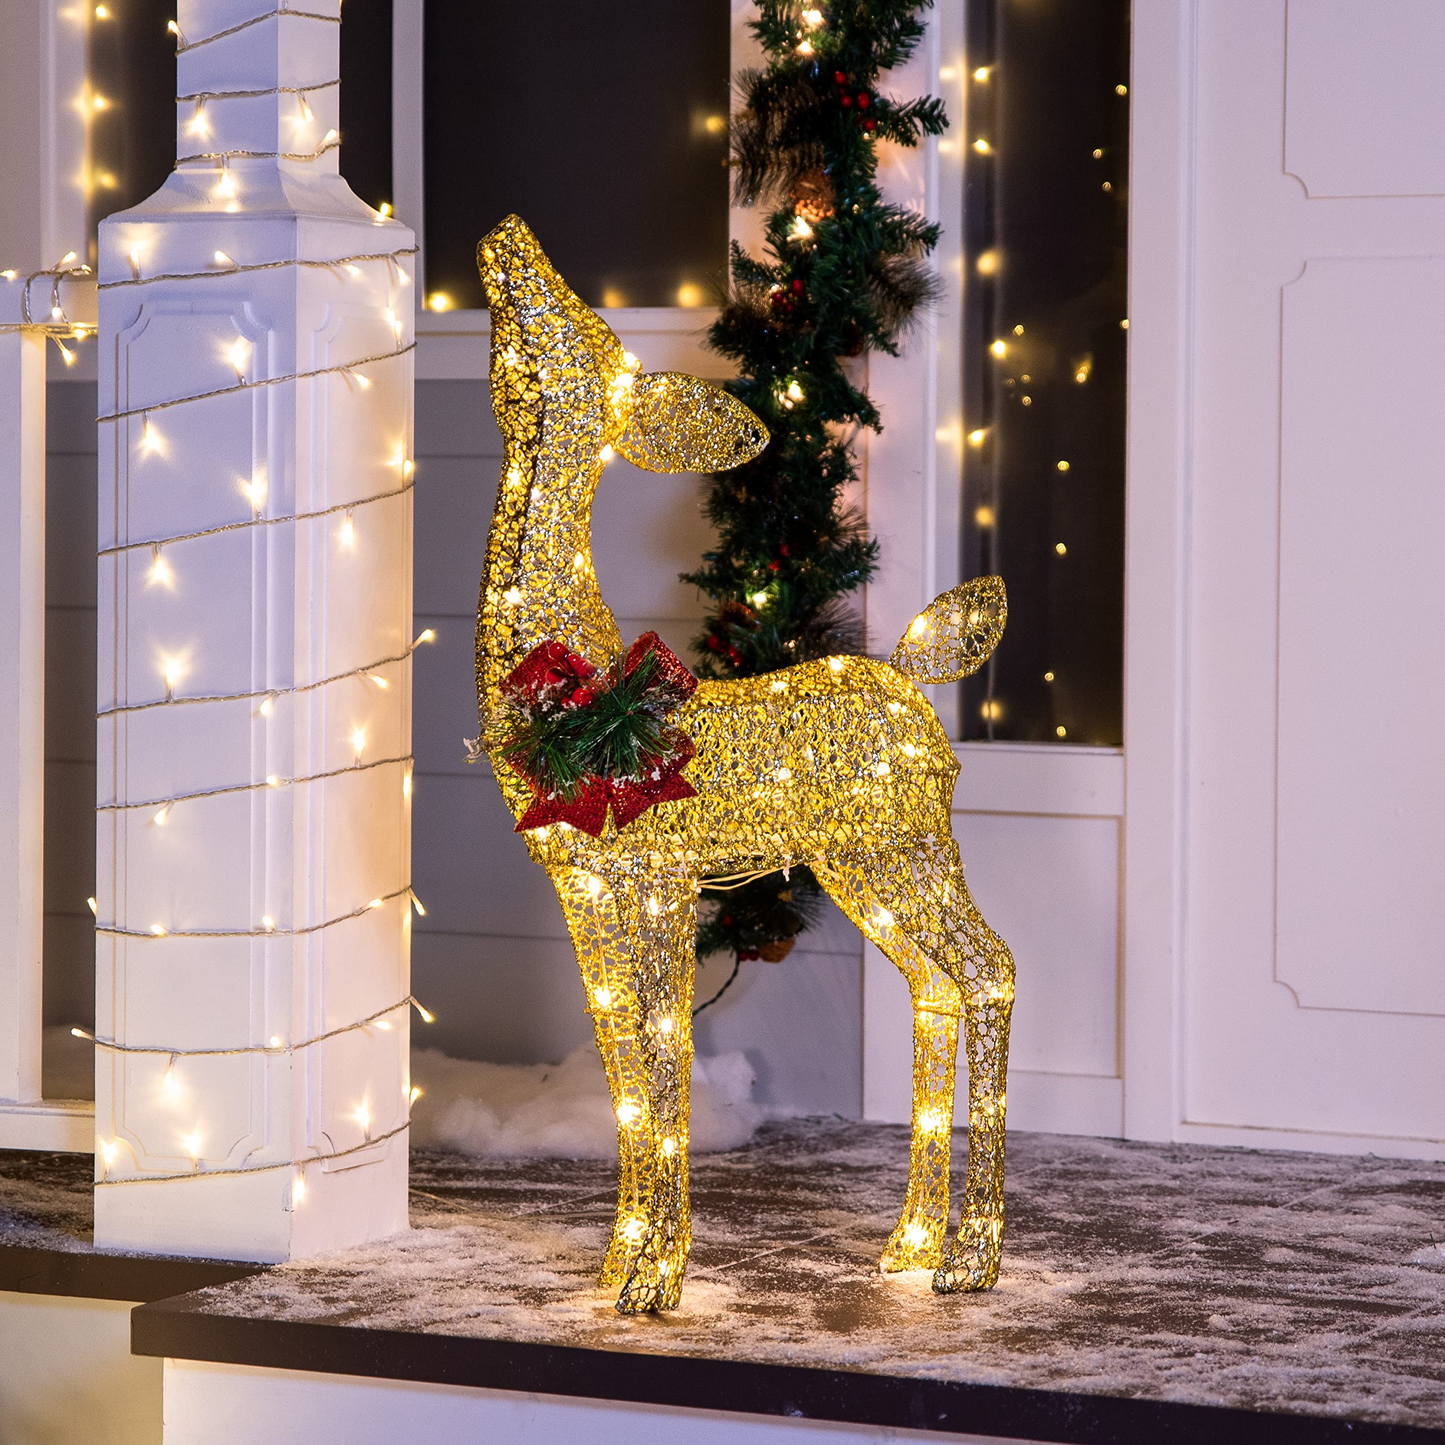 3ft LED Yard Lights - Fabric Gold Fawn